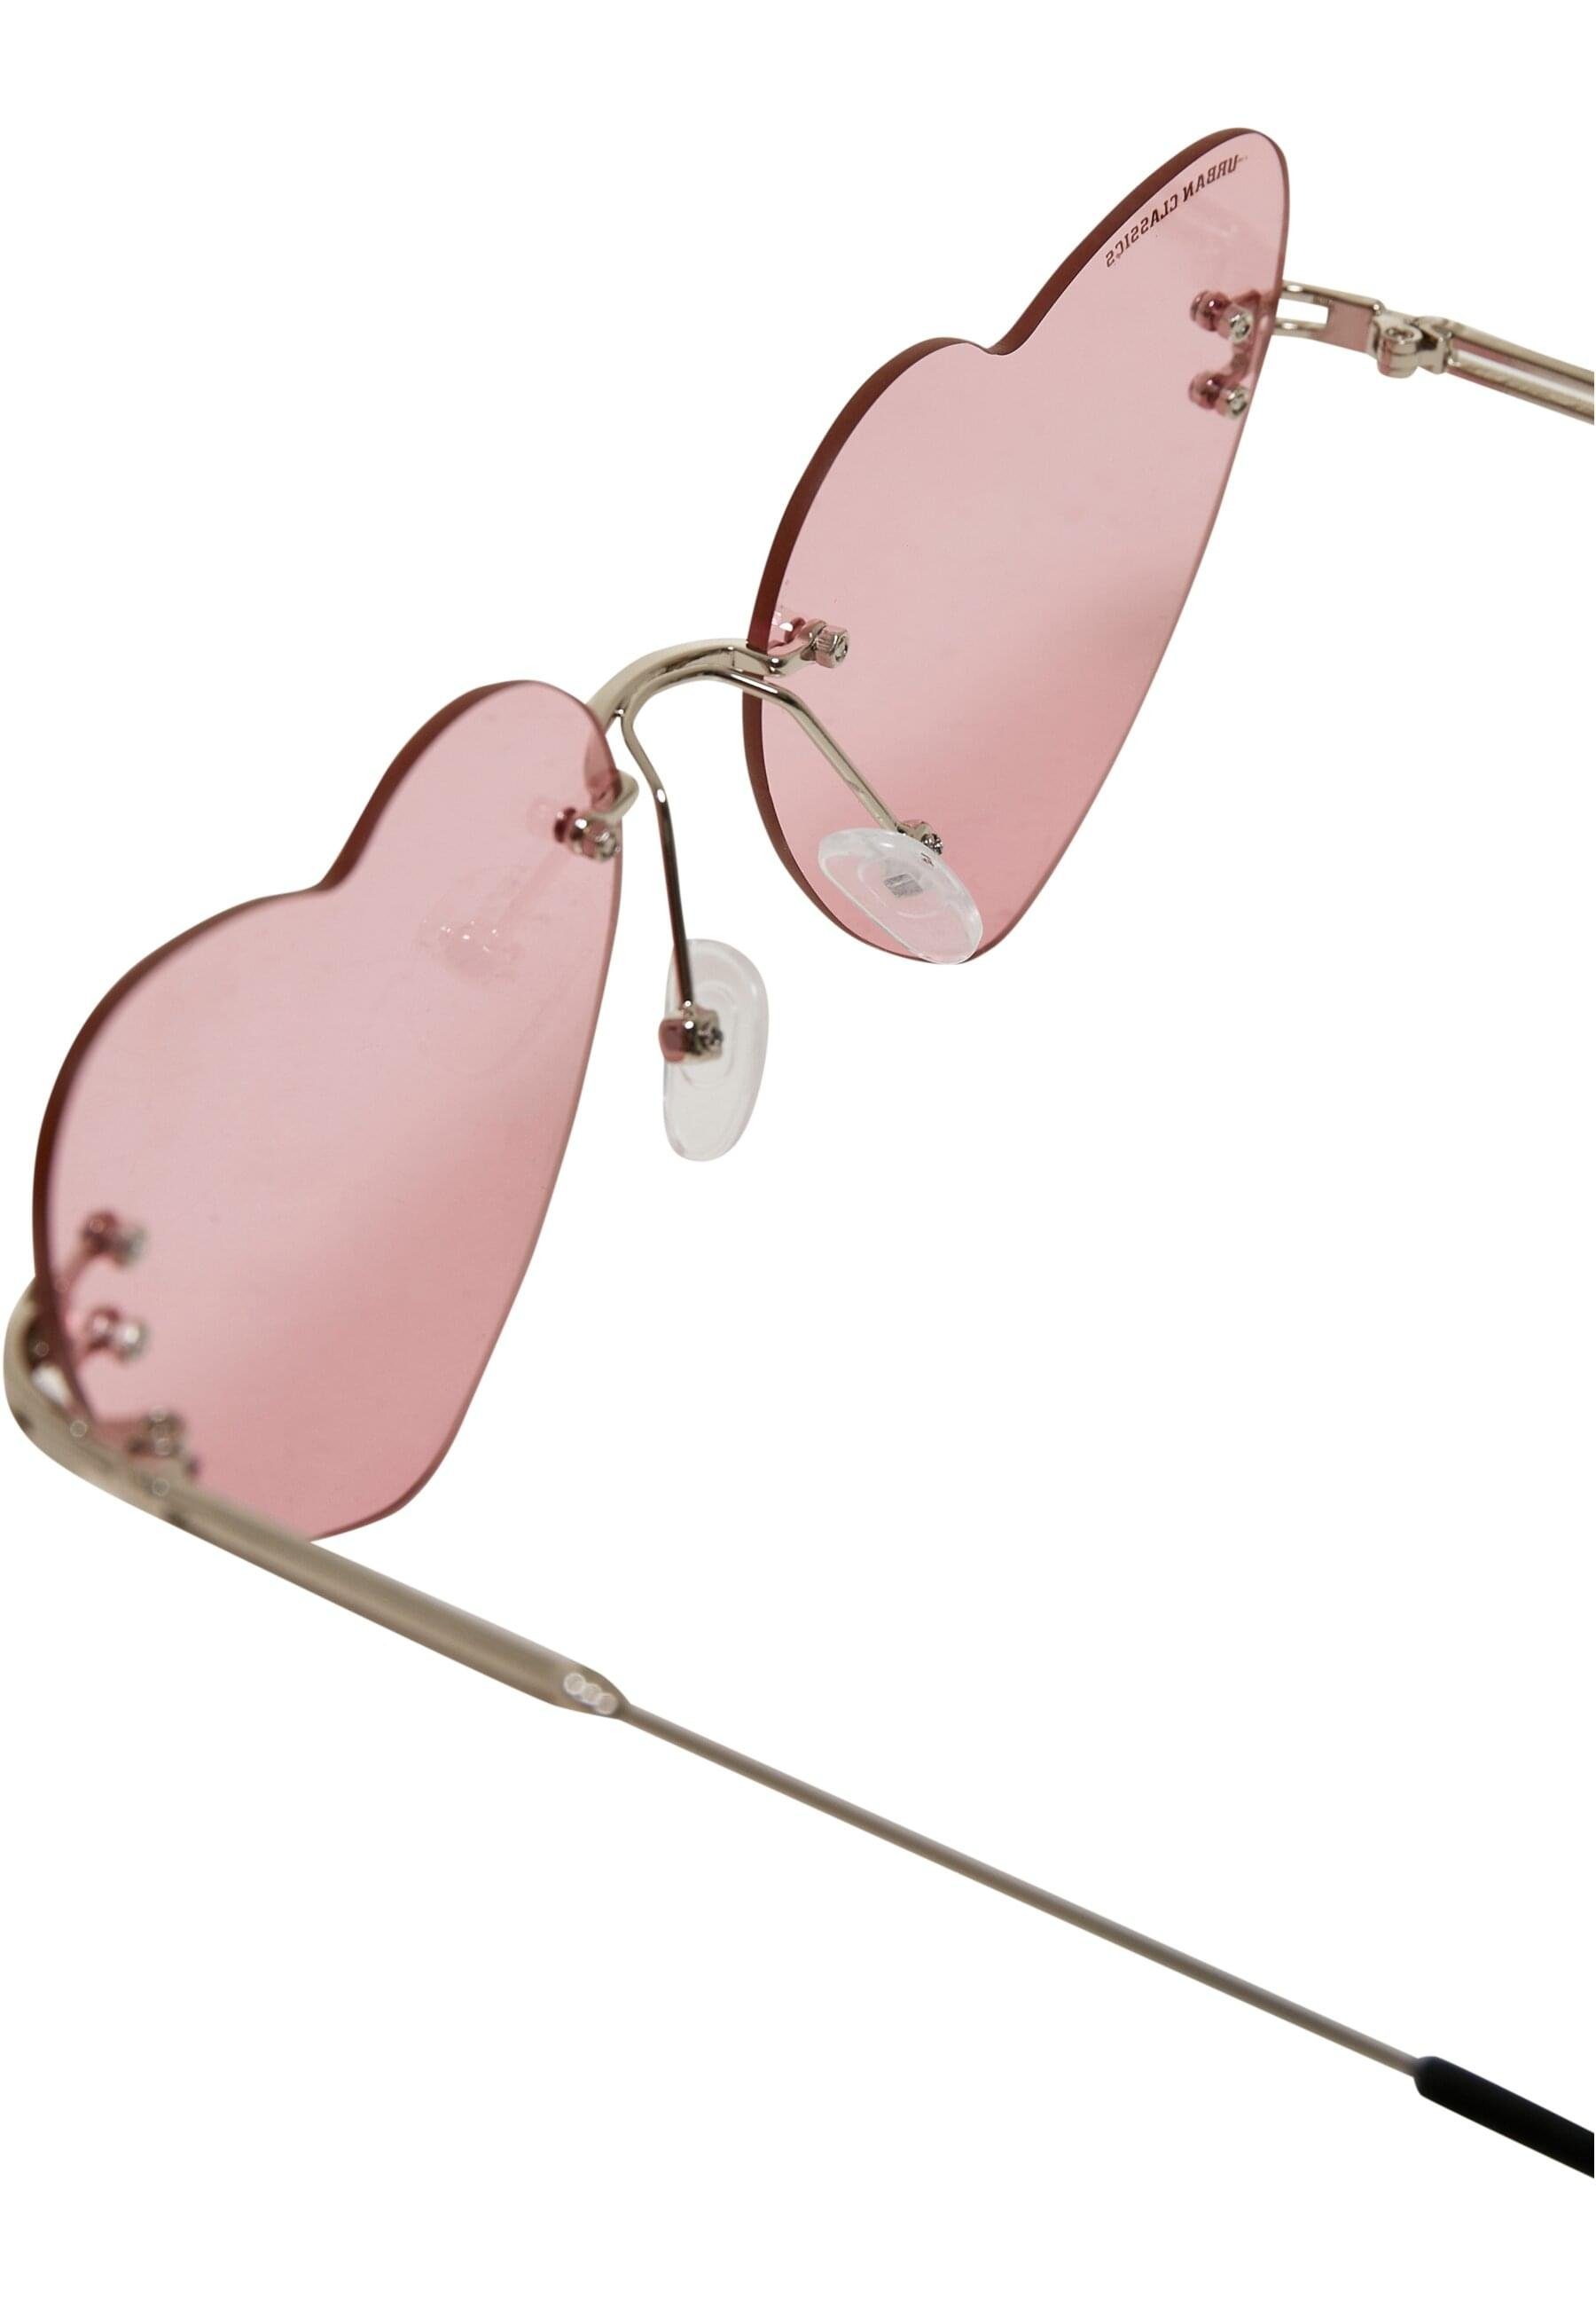 URBAN CLASSICS Sonnenbrille Sunglasses Heart Chain With Unisex rose/silver